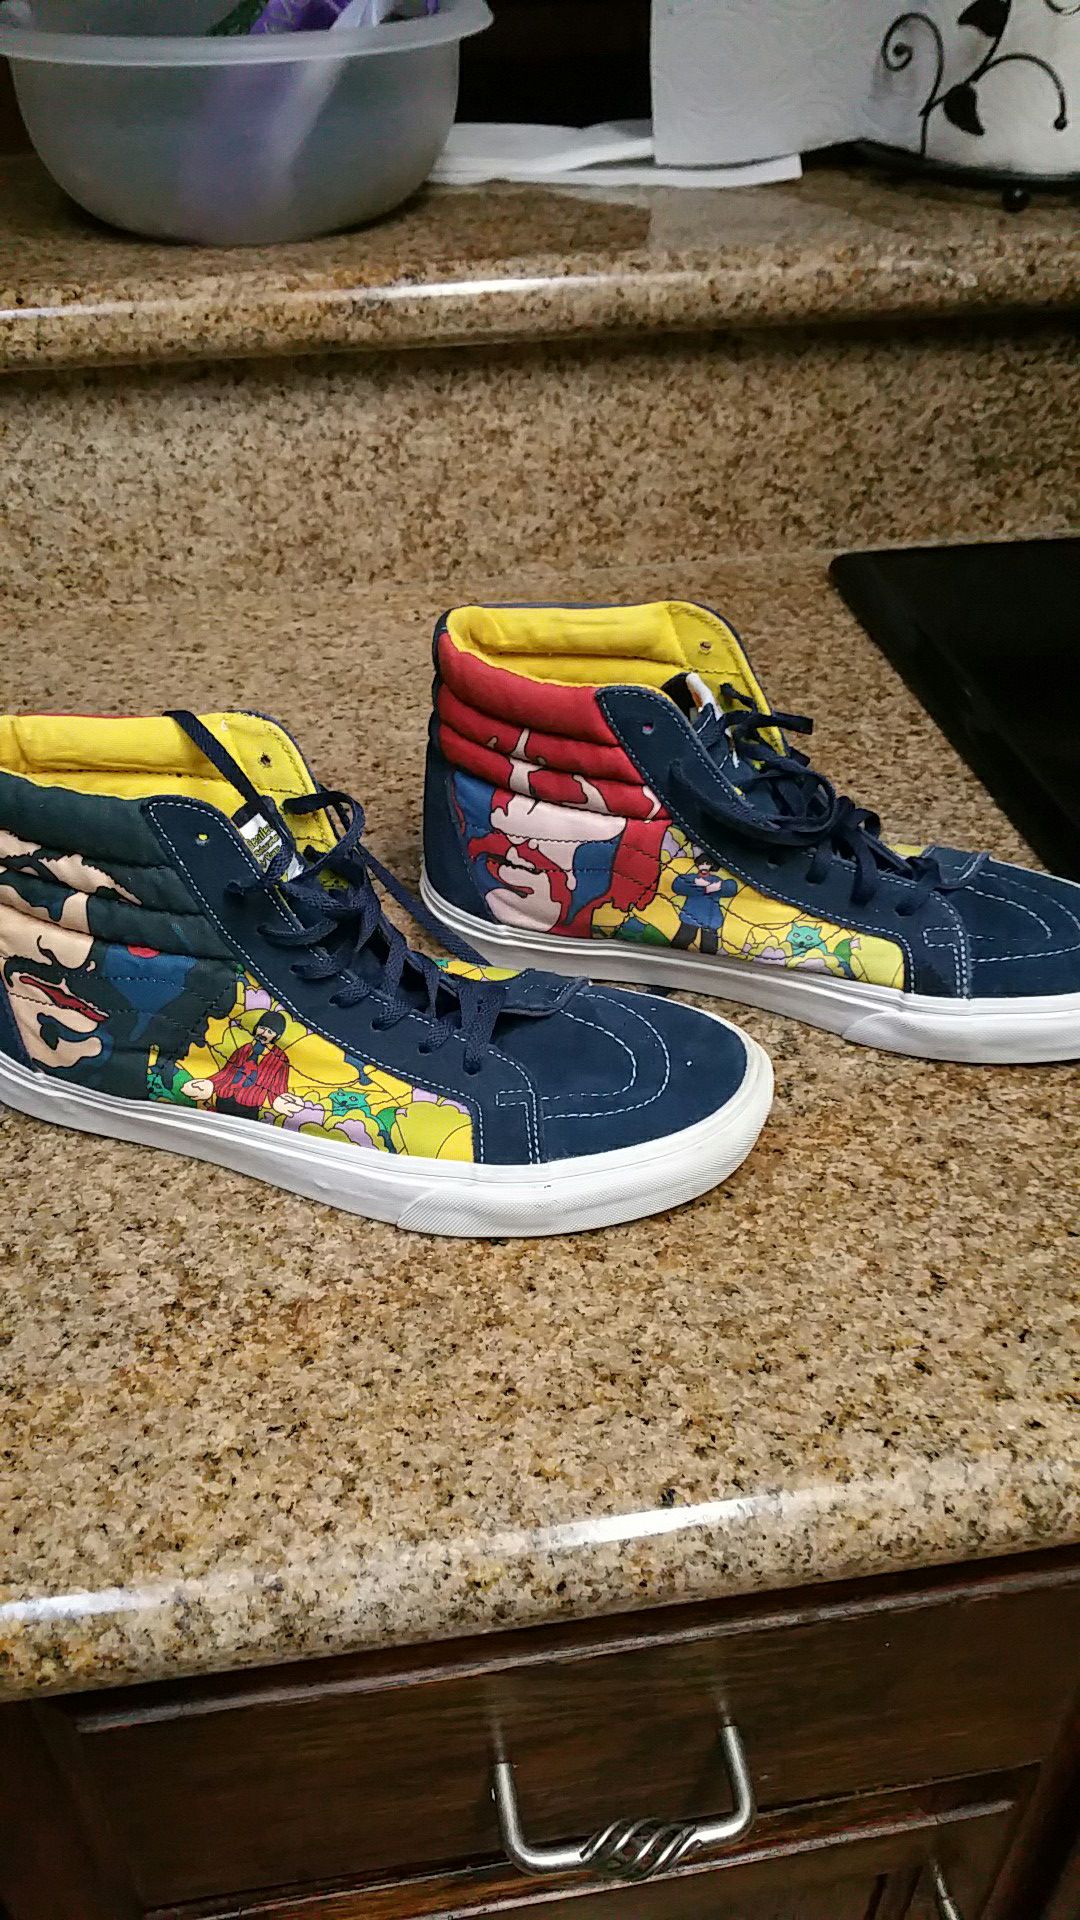 Wiskunde Ritueel Beurs The Beatles Vans shoes size 9 in mens and 10 and 1/2 in women's for Sale in  Turlock, CA - OfferUp